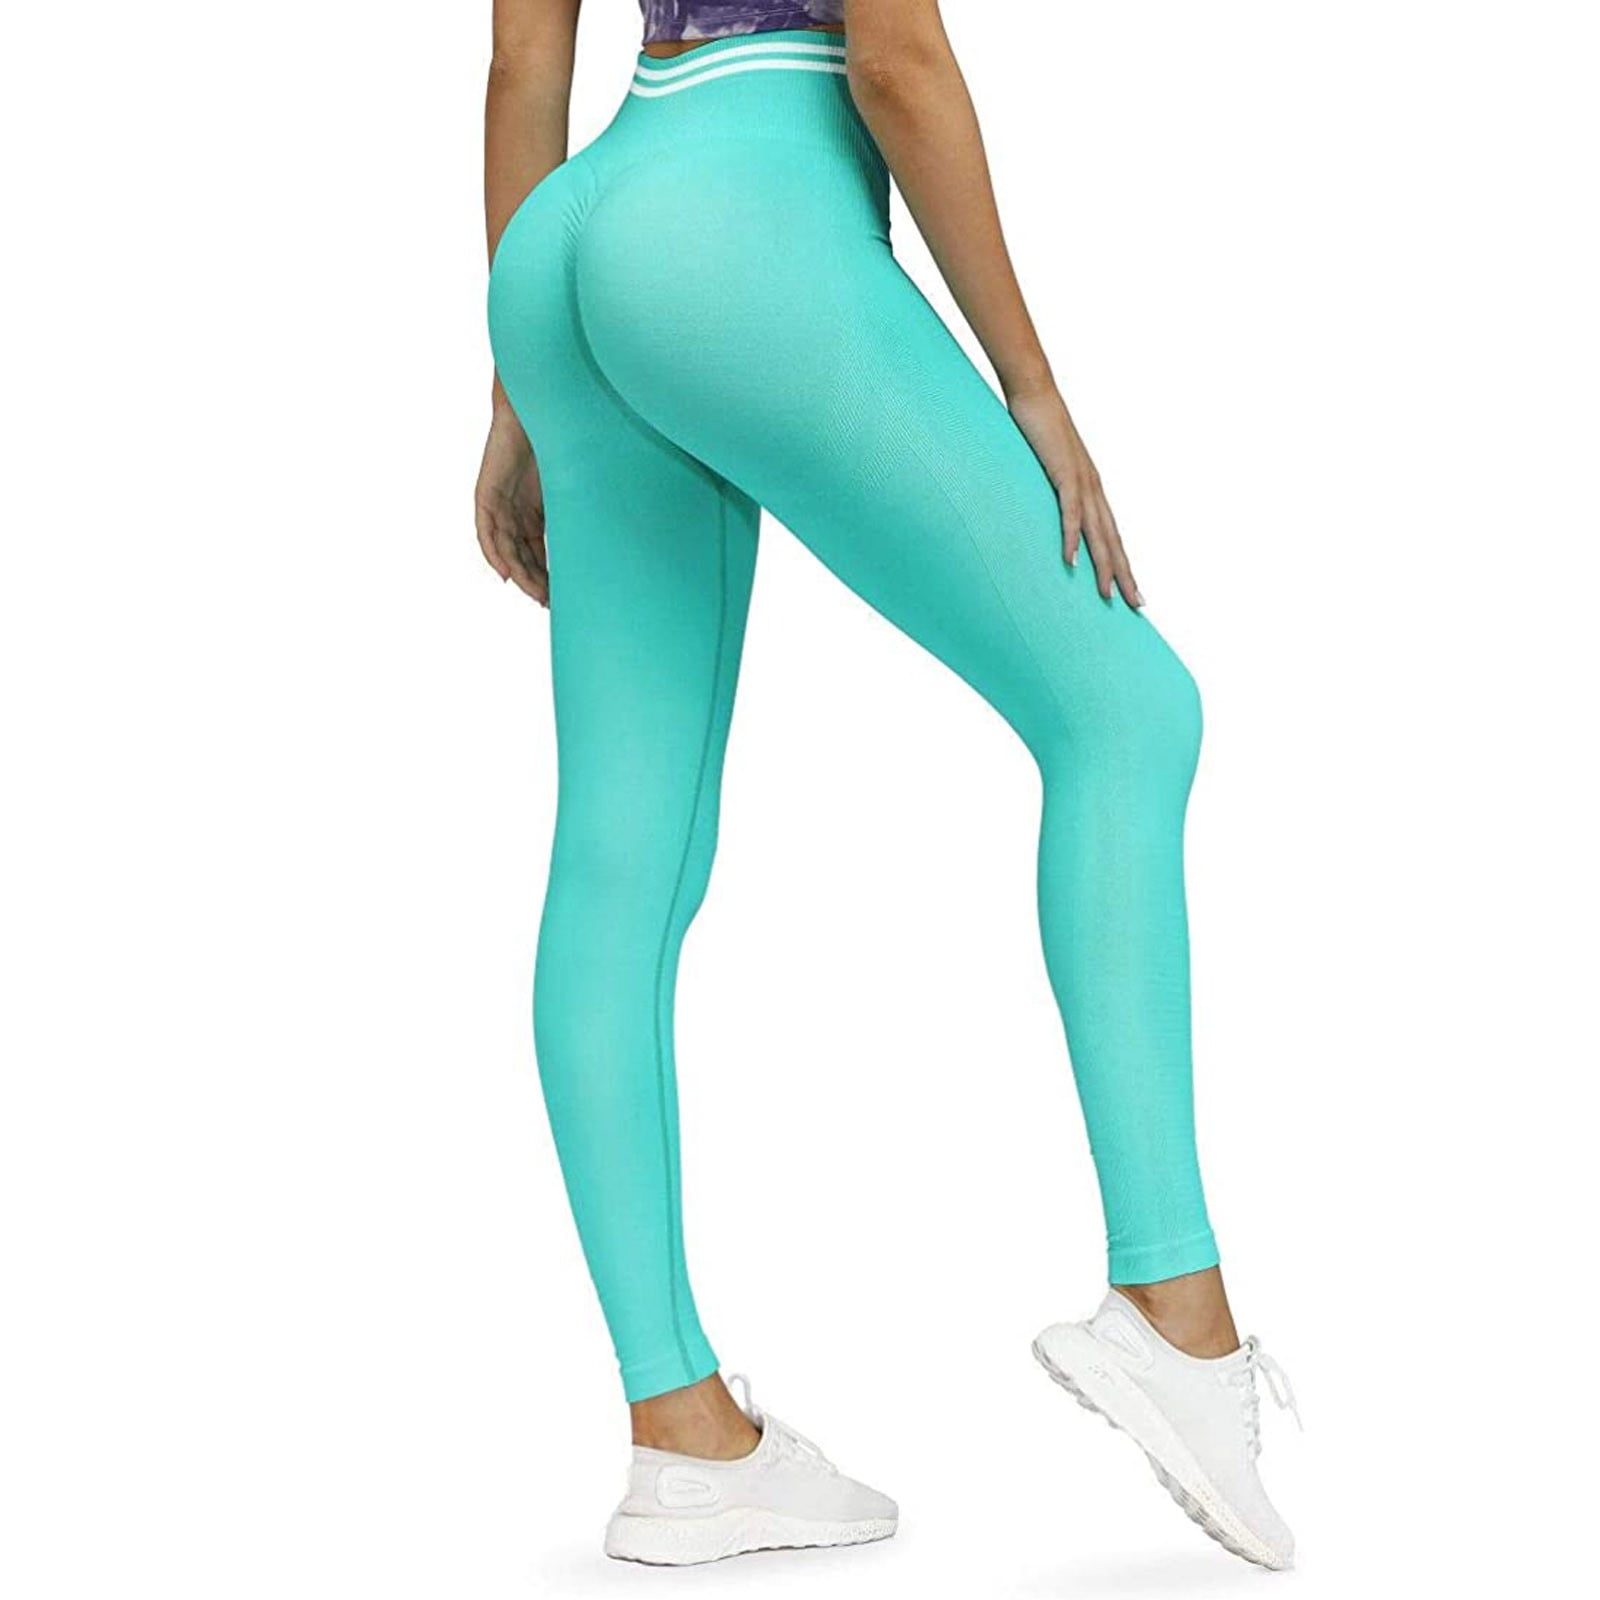 eczipvz Workout Leggings Leggings with Pockets for Women - High Waisted  Tummy Control Workout Yoga Pants for Running, Training Green,M - Walmart.com